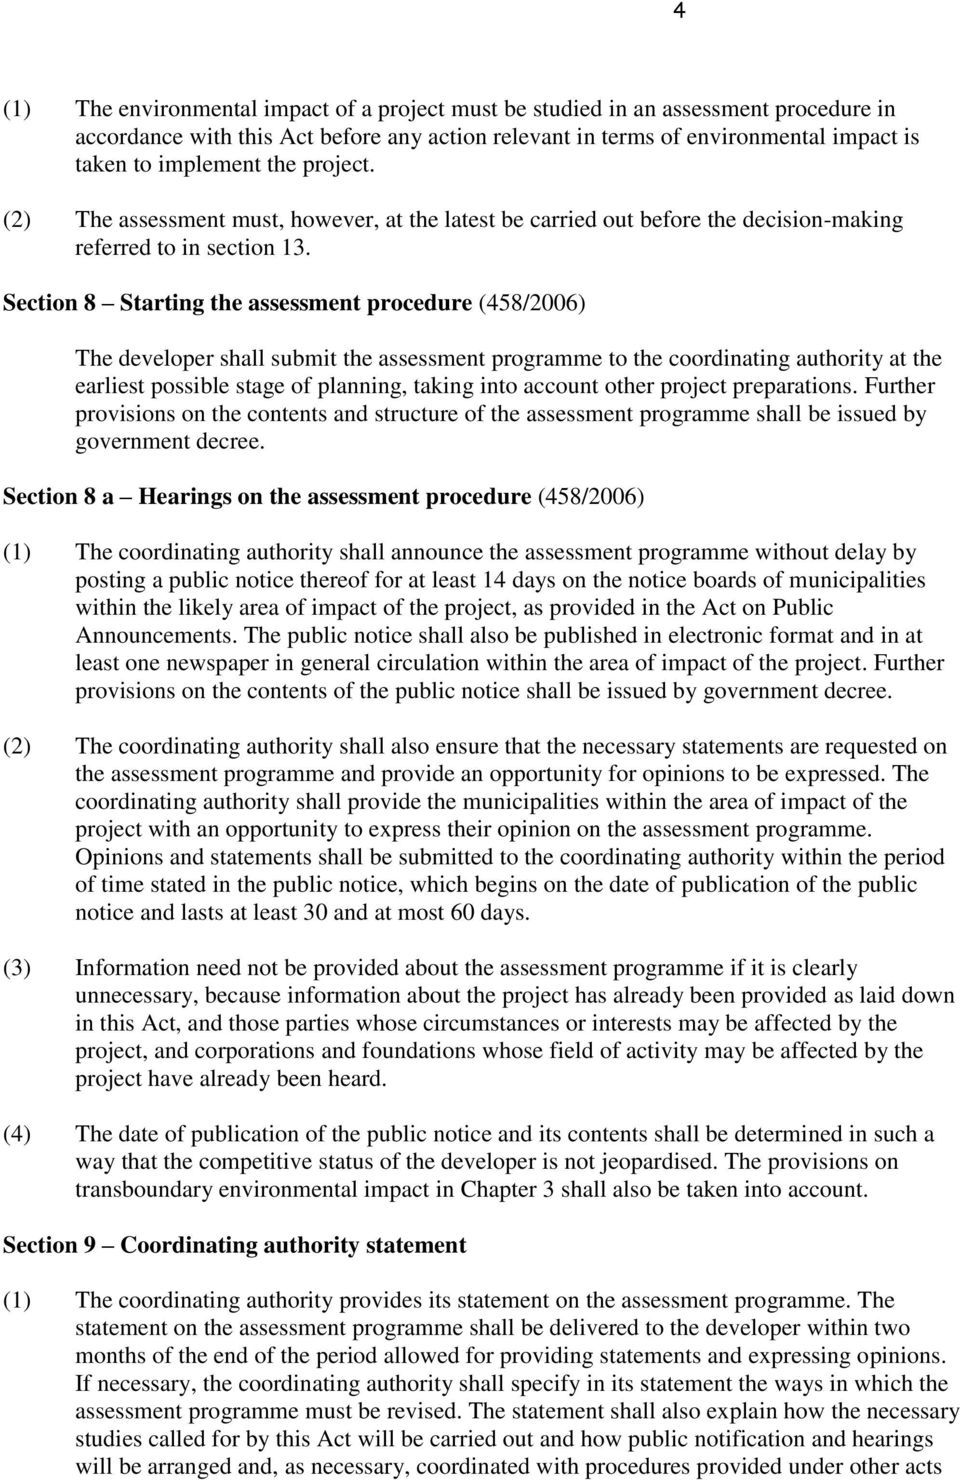 Section 8 Starting the assessment procedure (458/2006) The developer shall submit the assessment programme to the coordinating authority at the earliest possible stage of planning, taking into